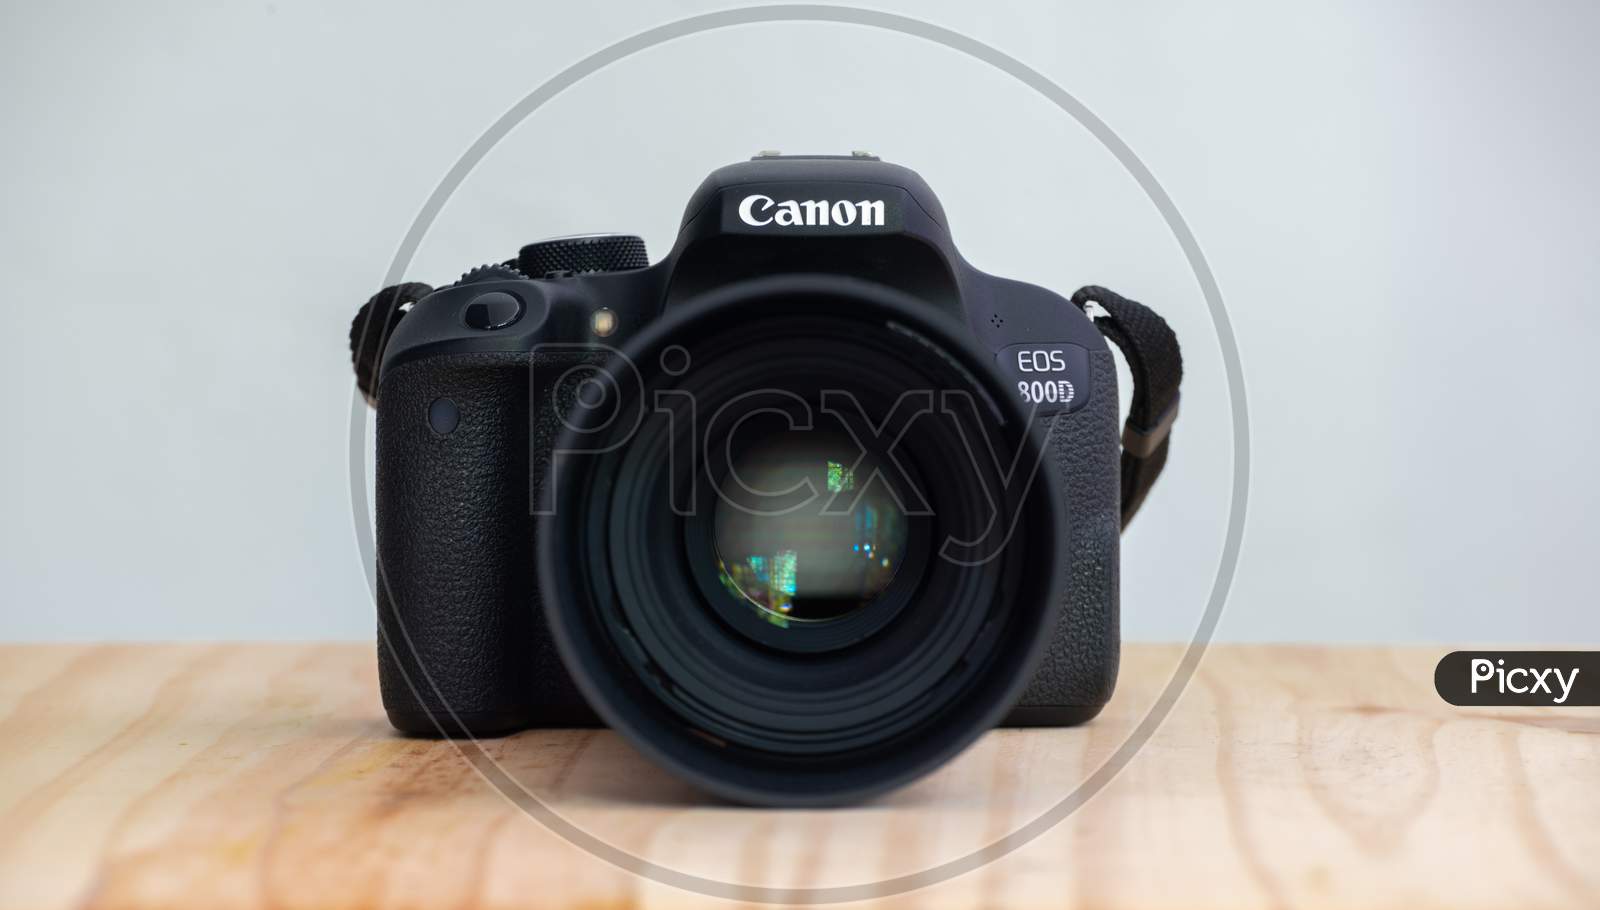 Galle, Sri Lanka - 02 18 2021: Canon Eos 800D Also Known As Rebel T7I Dslr Camera And The Mounted 100Mm Macro Lens Front View, On A Wooden Table, Neutral Color Background.